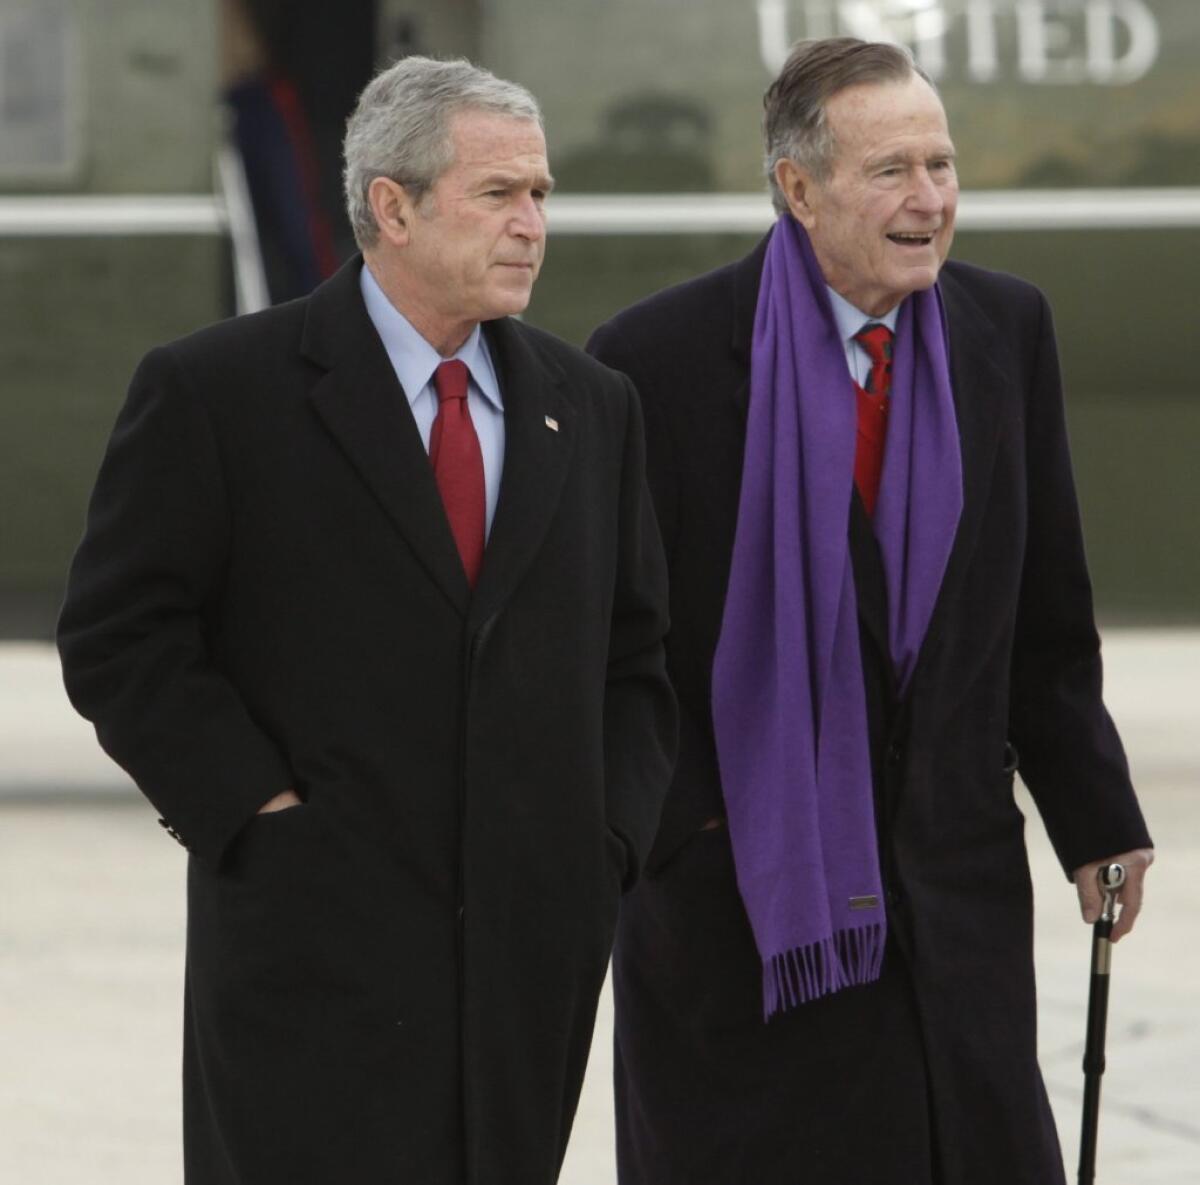 Private photos of presidents George W. Bush, left, and his father George H.W. Bush were hacked and put online.